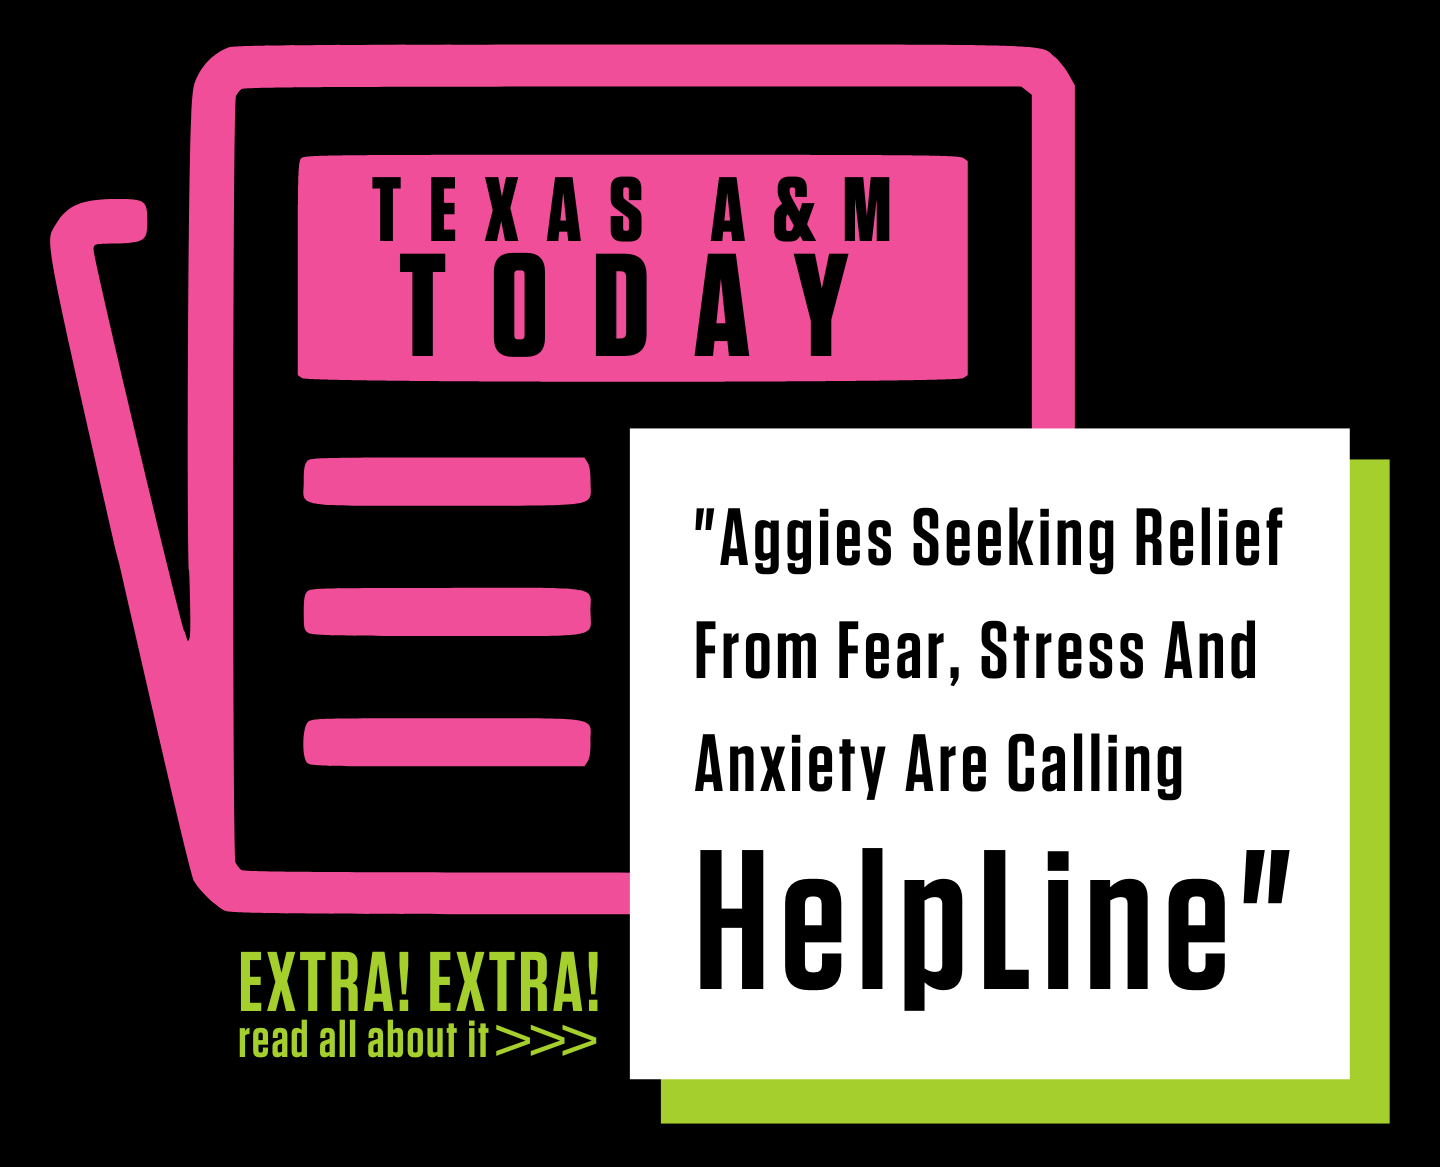 Texas A&M Today: "Aggies Seeking Relief From Fear, Stress and Anxiety Are Calling HelpLine"